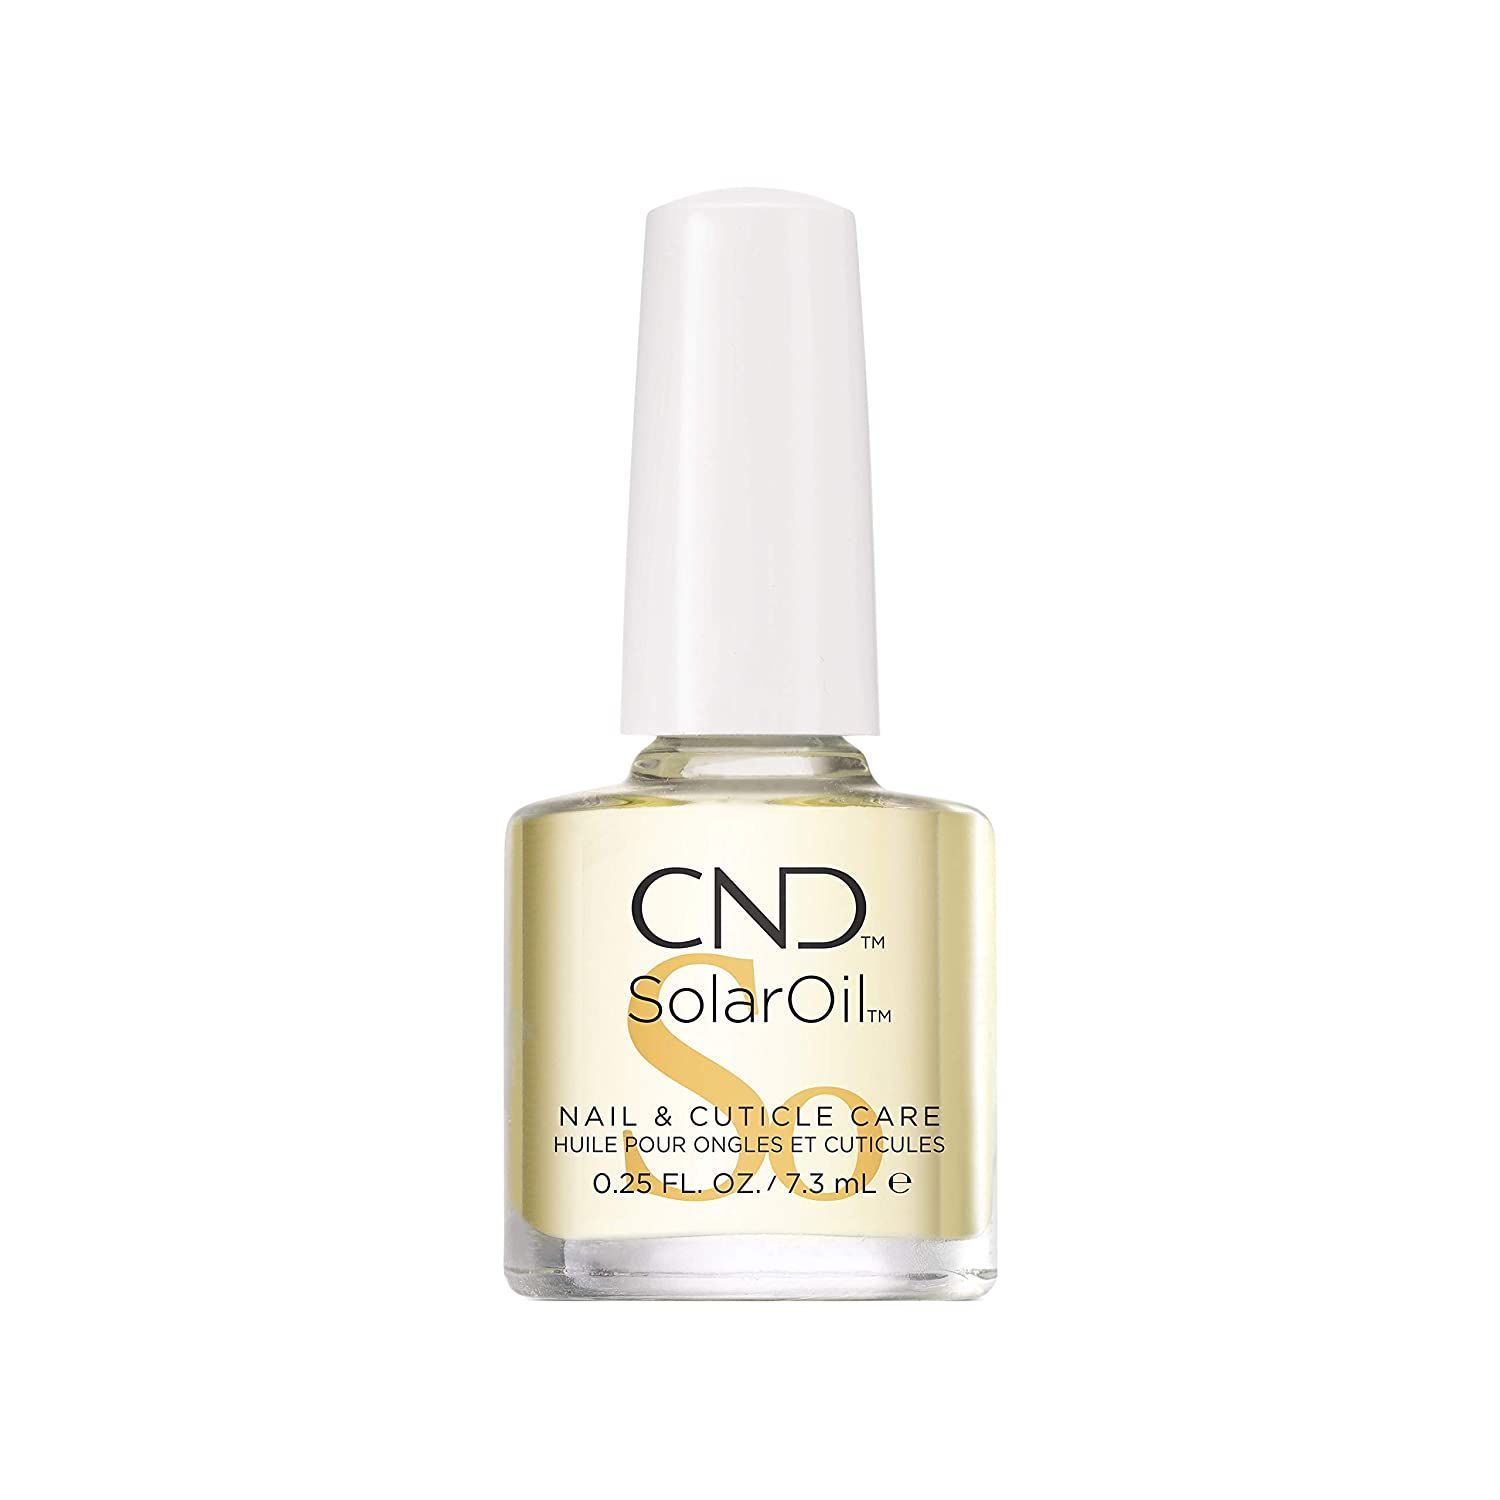 11 Best Cuticle Oils For Dry Nails in 2021: Essie, Tenoverten, More